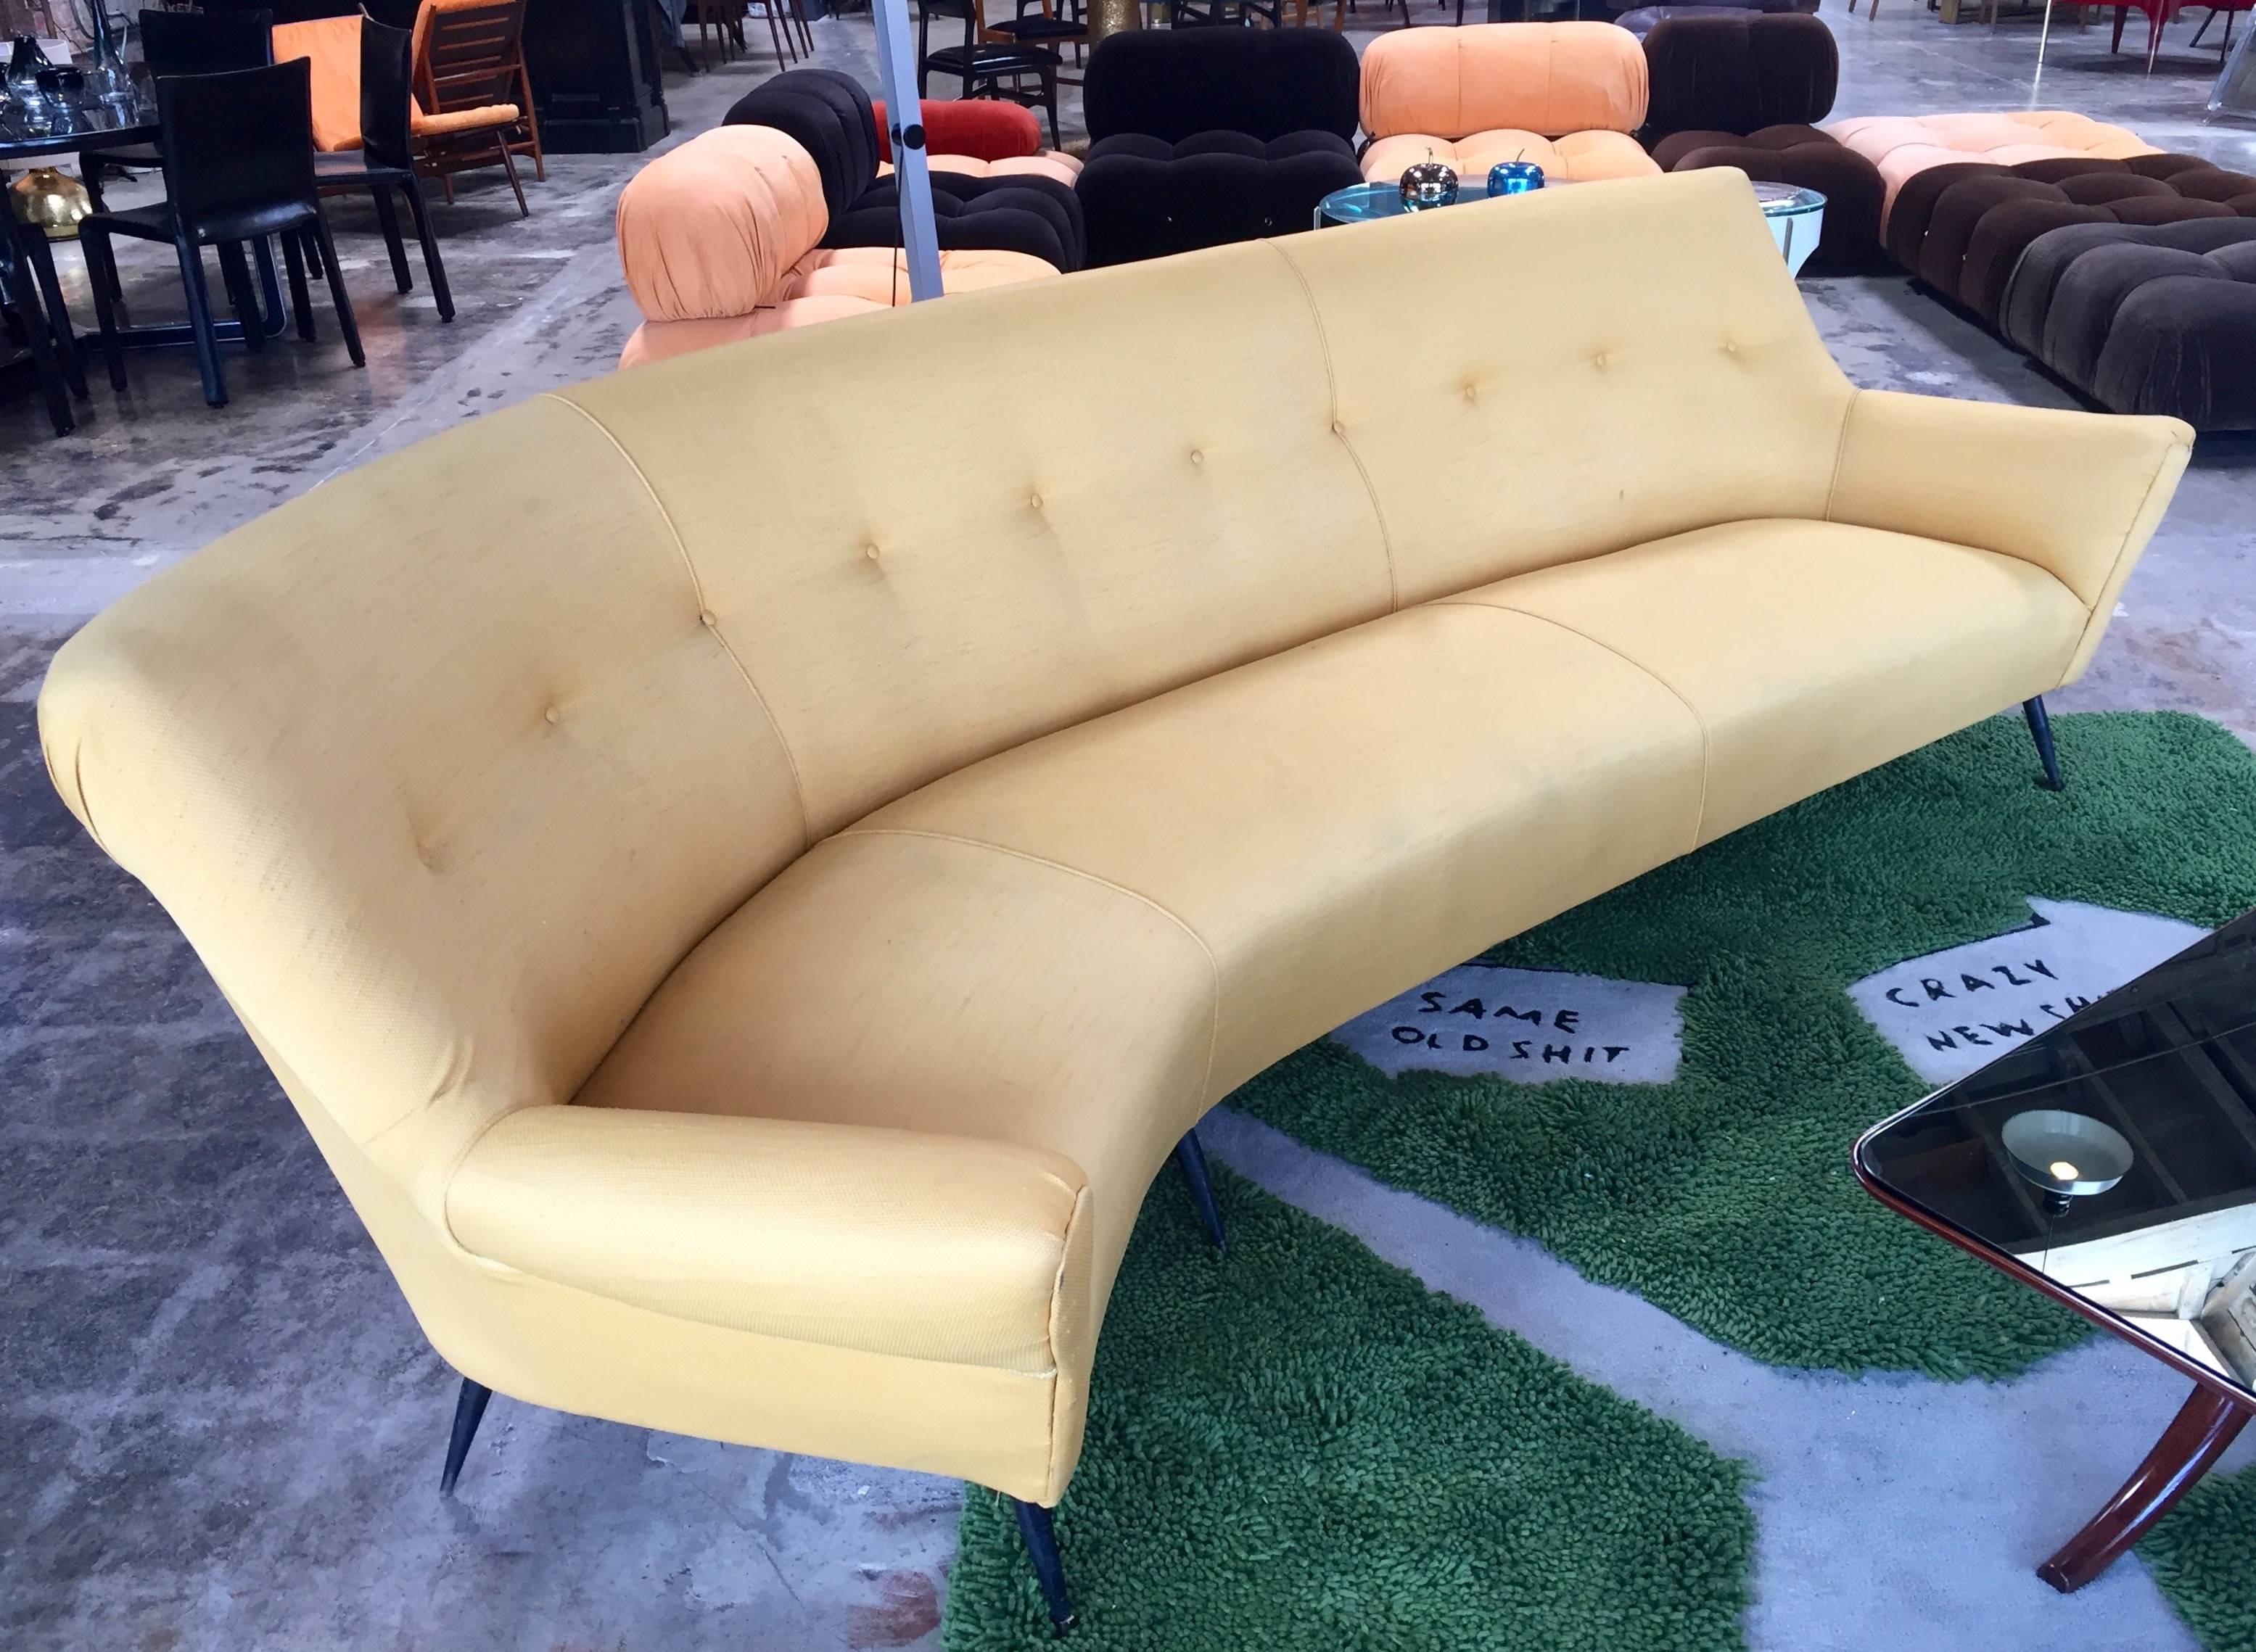 Beautiful Italian 20th century vintage curved four-seat sofa composed of six splayed polished legs, large wing shaped arms and a statement high back in the style of Ico Parisi.
Rare and original yellow fabric!